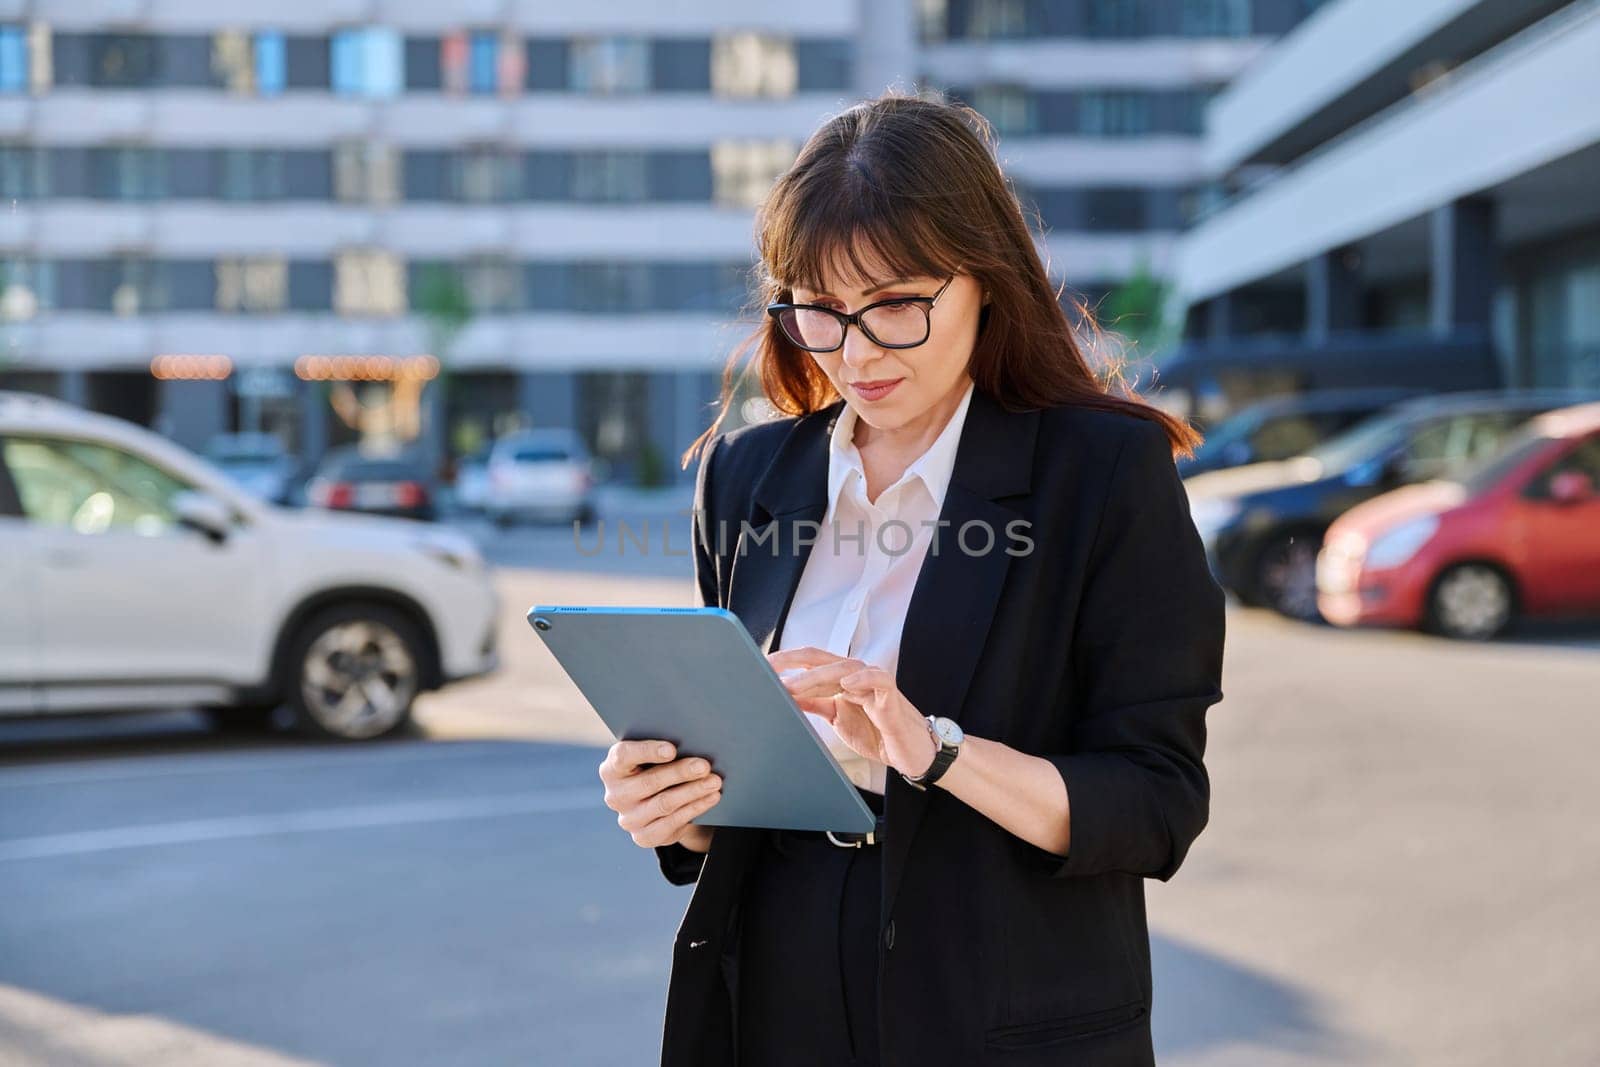 Mature woman manager professional agent entrepreneur using digital tablet for work, modern city. Female leader businesswoman in business suit, outdoor, internet software applications apps technology